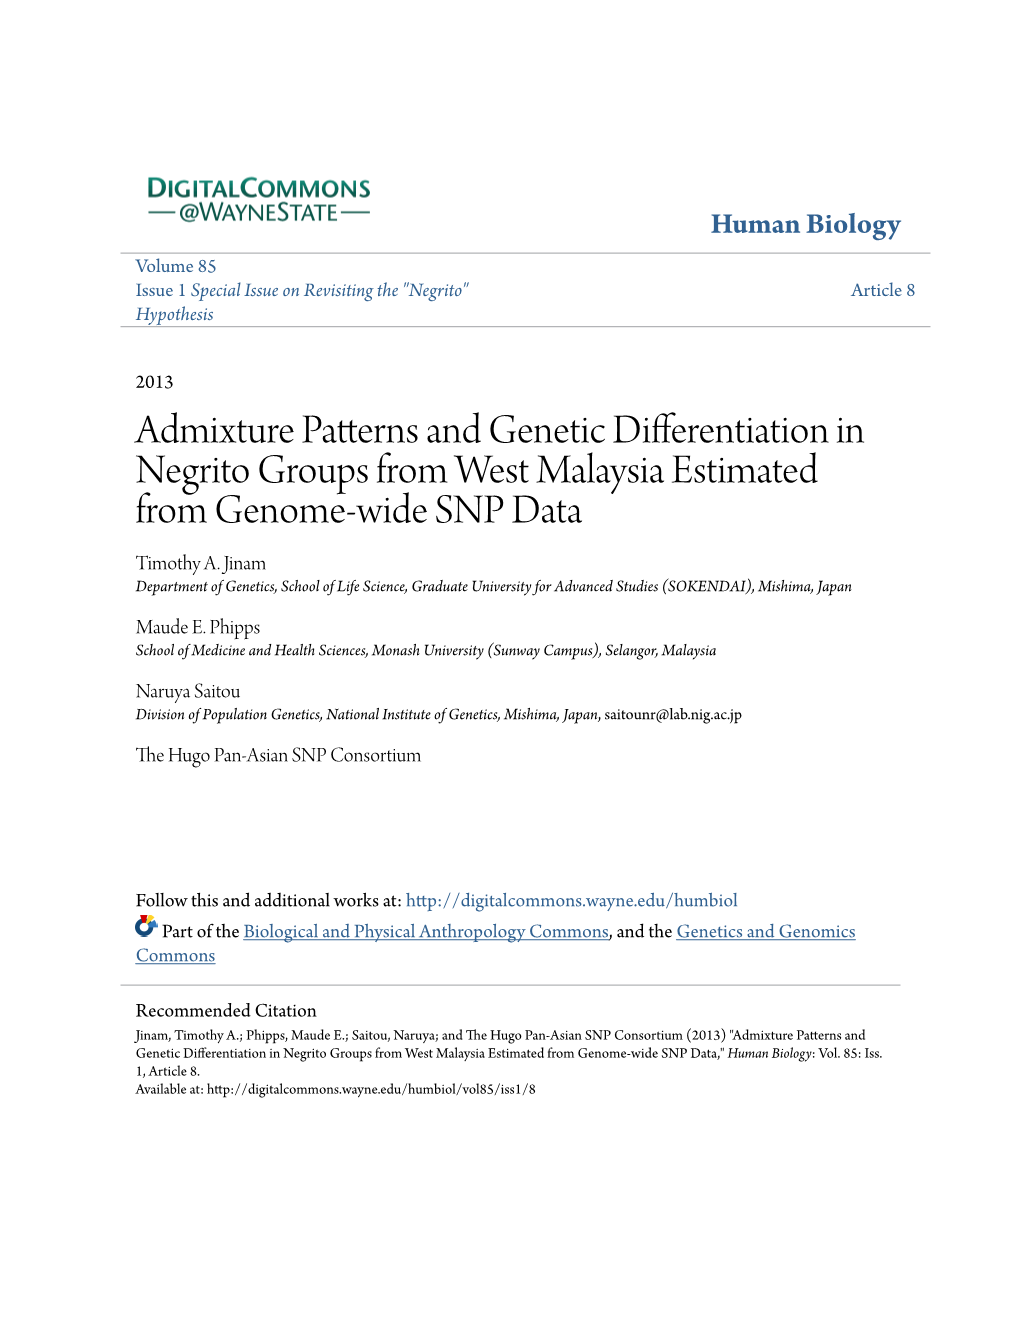 Admixture Patterns and Genetic Differentiation in Negrito Groups from West Malaysia Estimated from Genome-Wide SNP Data Timothy A